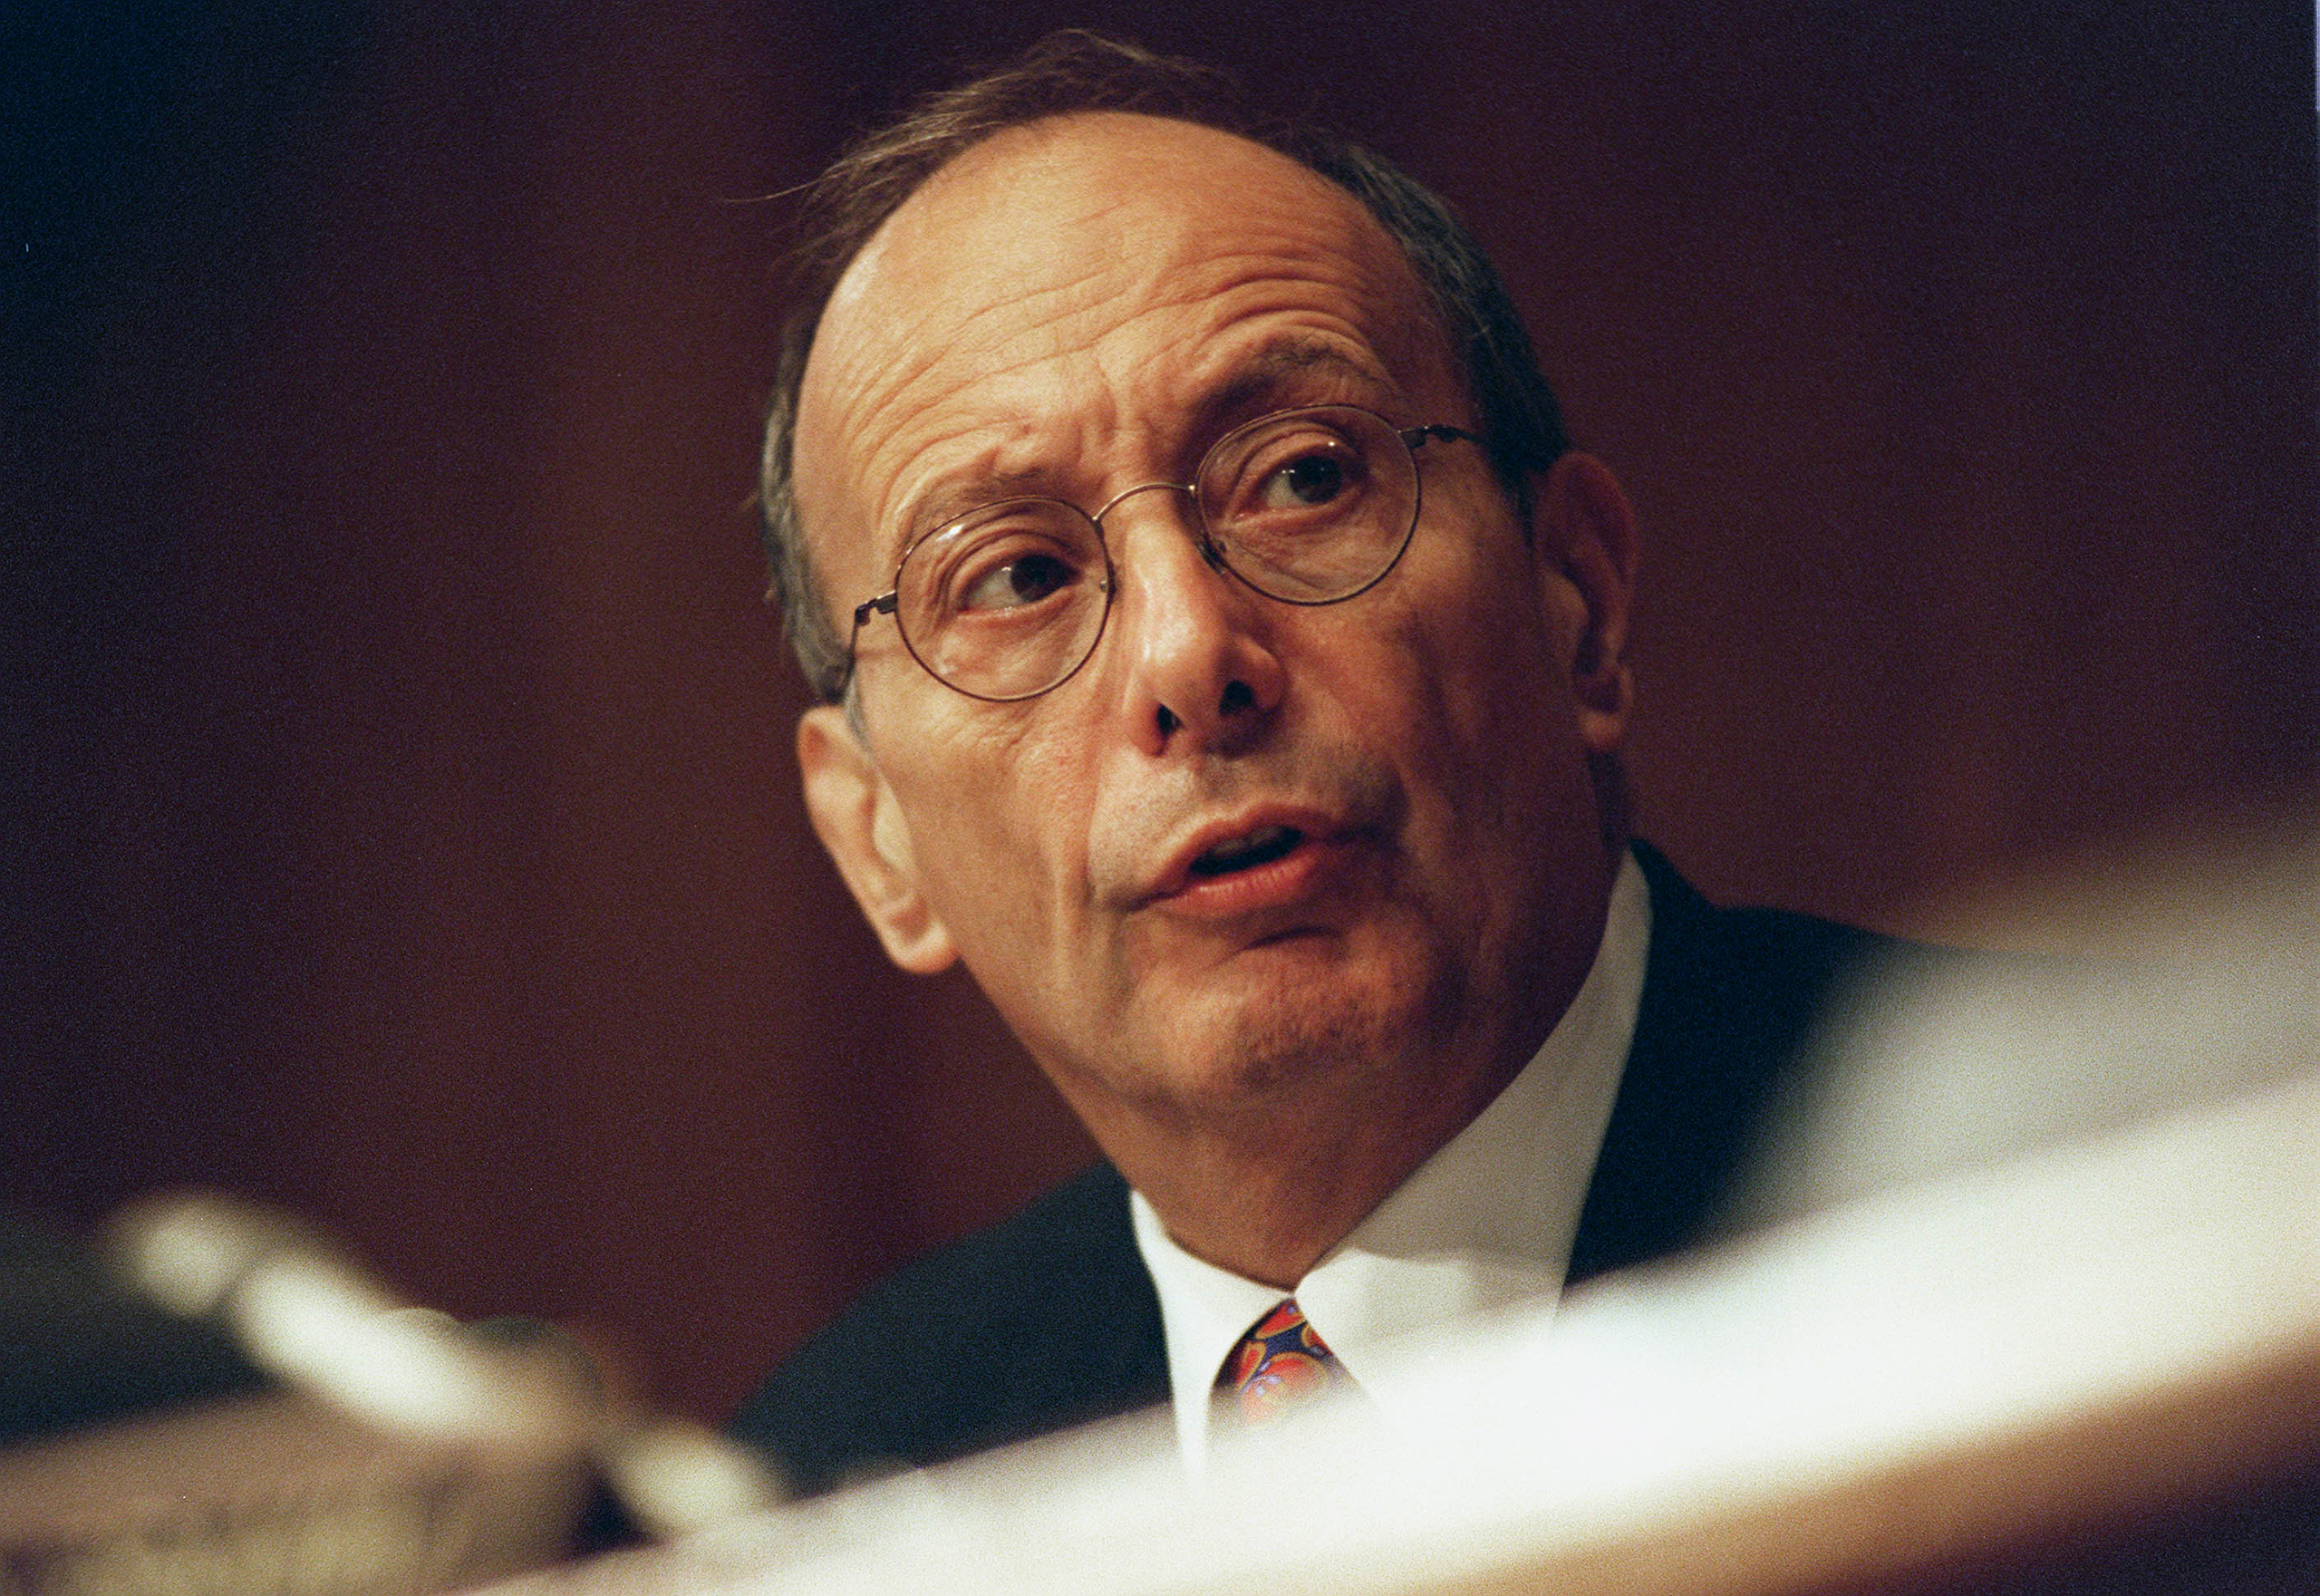 Former Sen. Alfonse D'Amato, in an undated photo at a hearing. (Scott J. Ferrell—Congressional Quarterly/Getty Images)